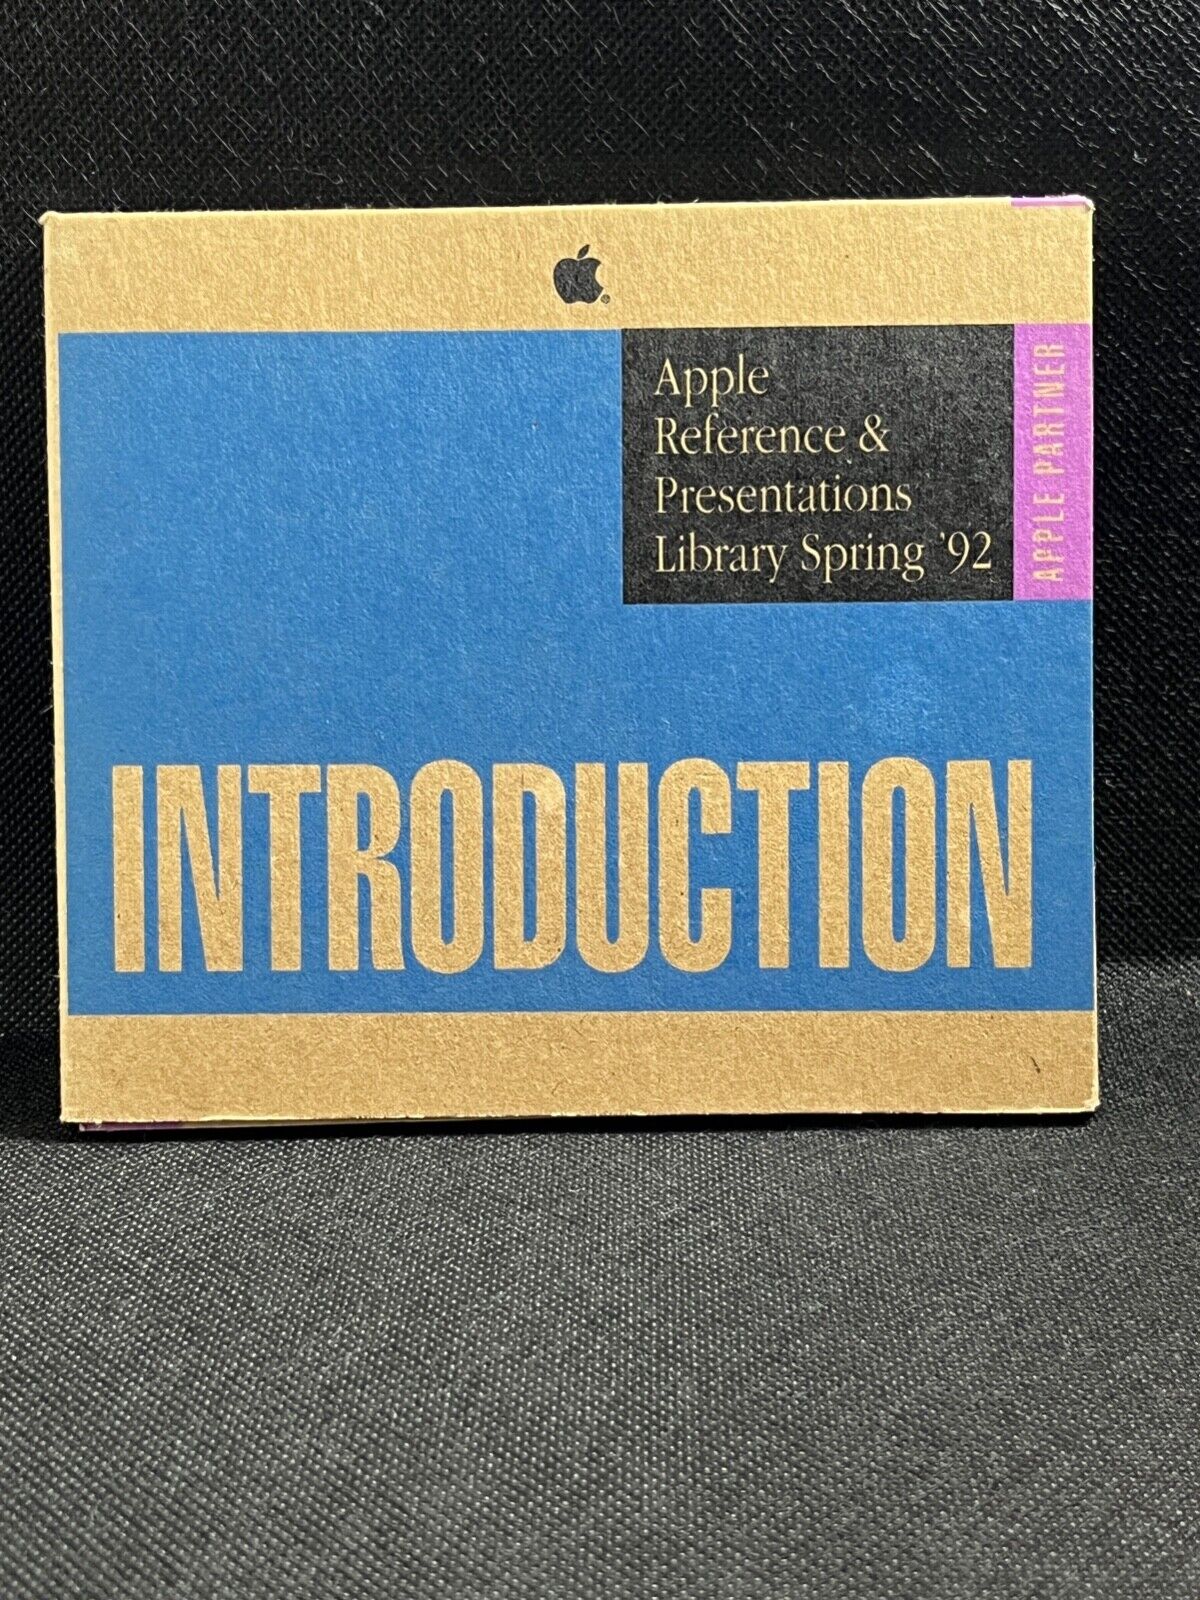 Vintage, rare and collectible, 1992 Apple Reference & Presentations Library Spri